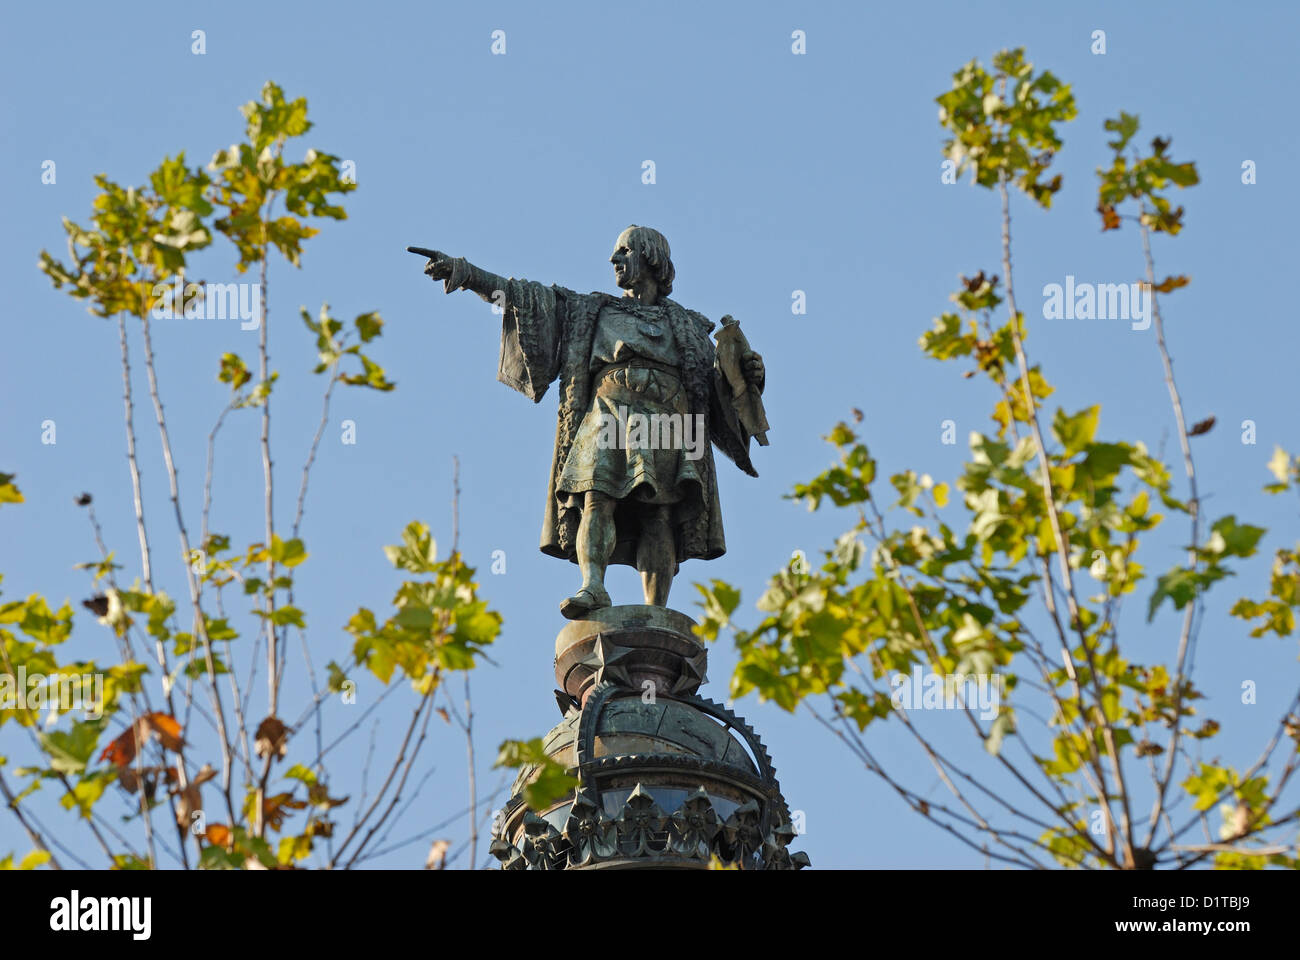 Barcelona, Catalonia, Spain. Monument a Colom / Monument to Columbus (1888) Statue on top Stock Photo